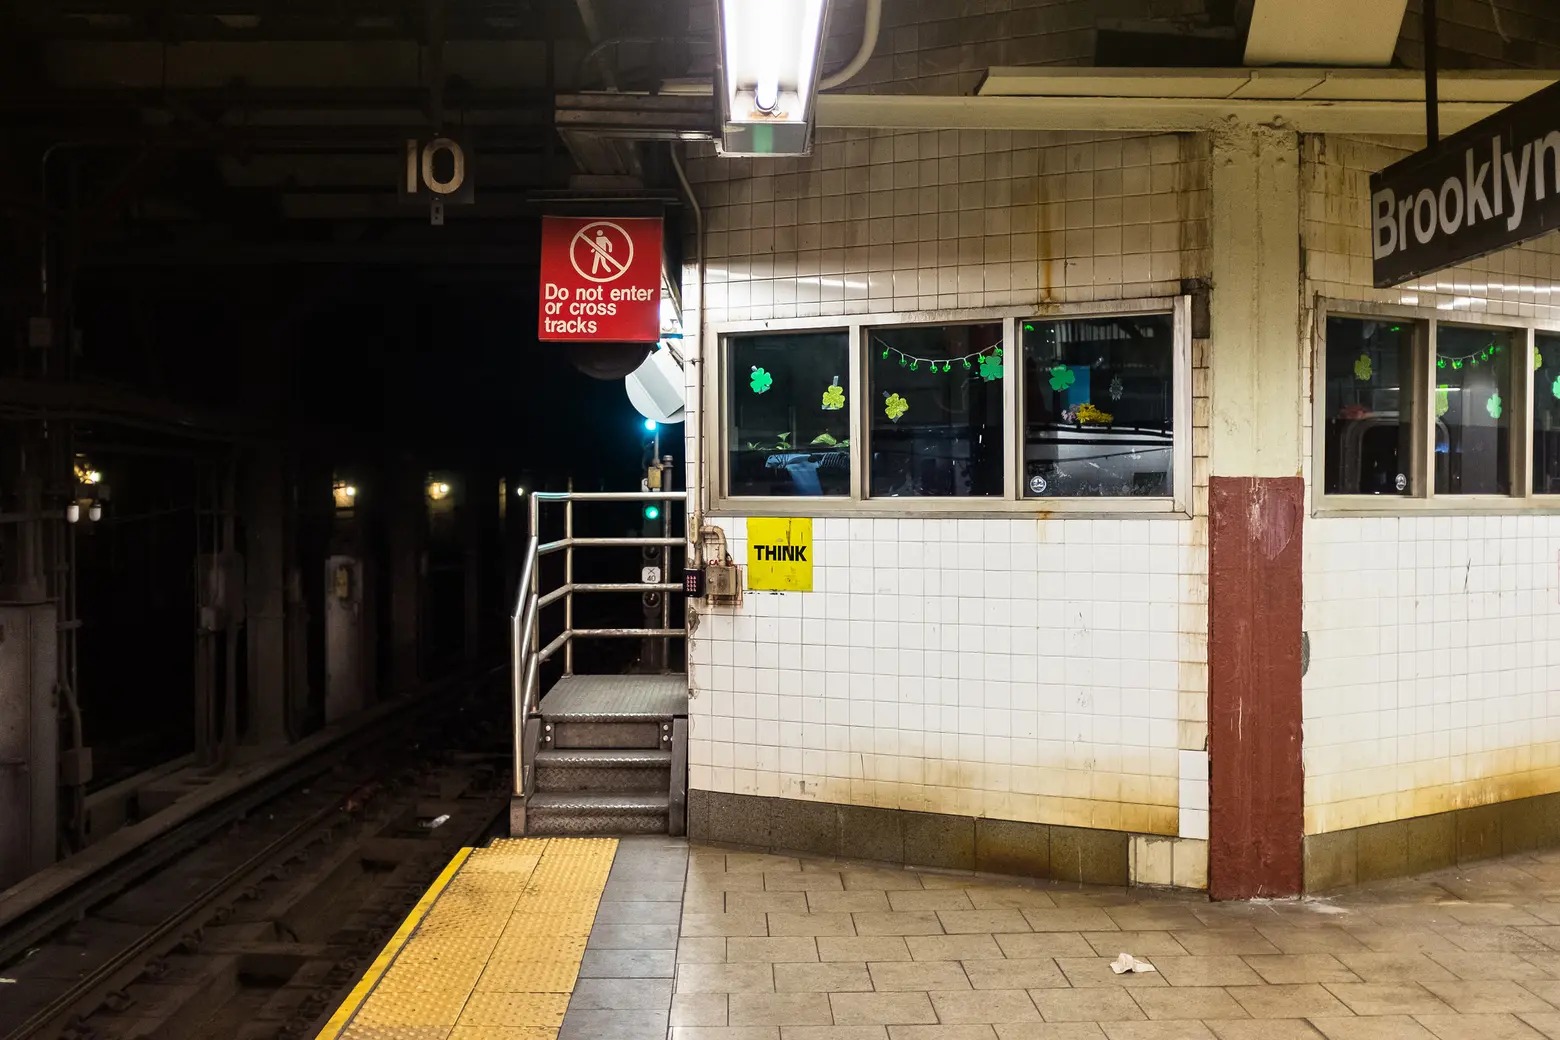 This weekend’s subway service changes are comparatively merciful